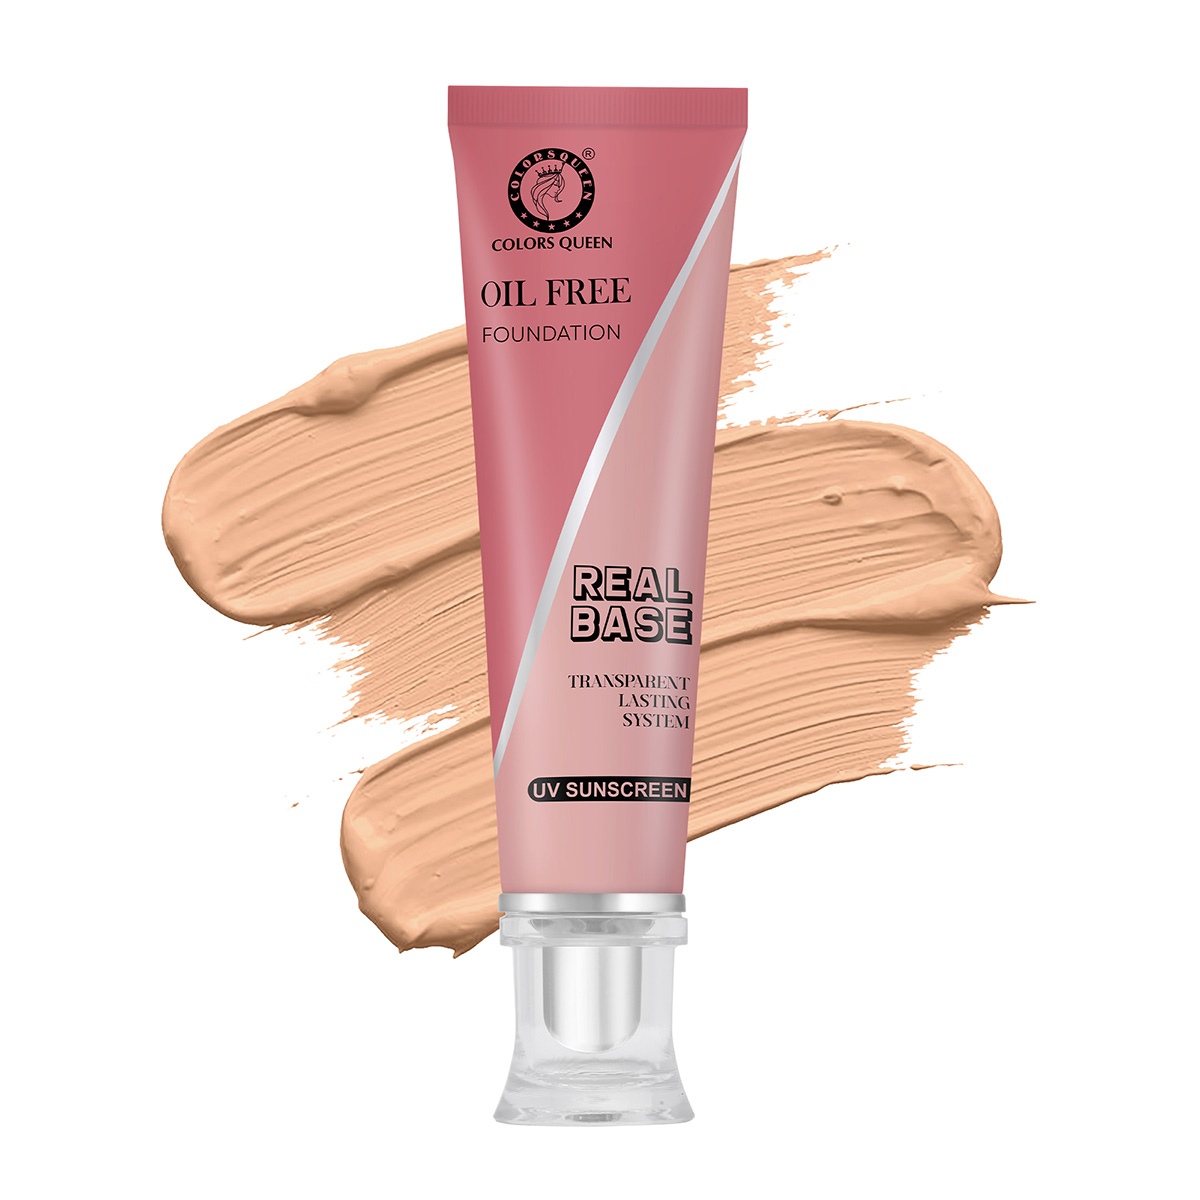 Colors Queen Real Base Oil Free, Waterproof Liquid Foundation With SPF - Shade 04 Natural Almonds, 60gm